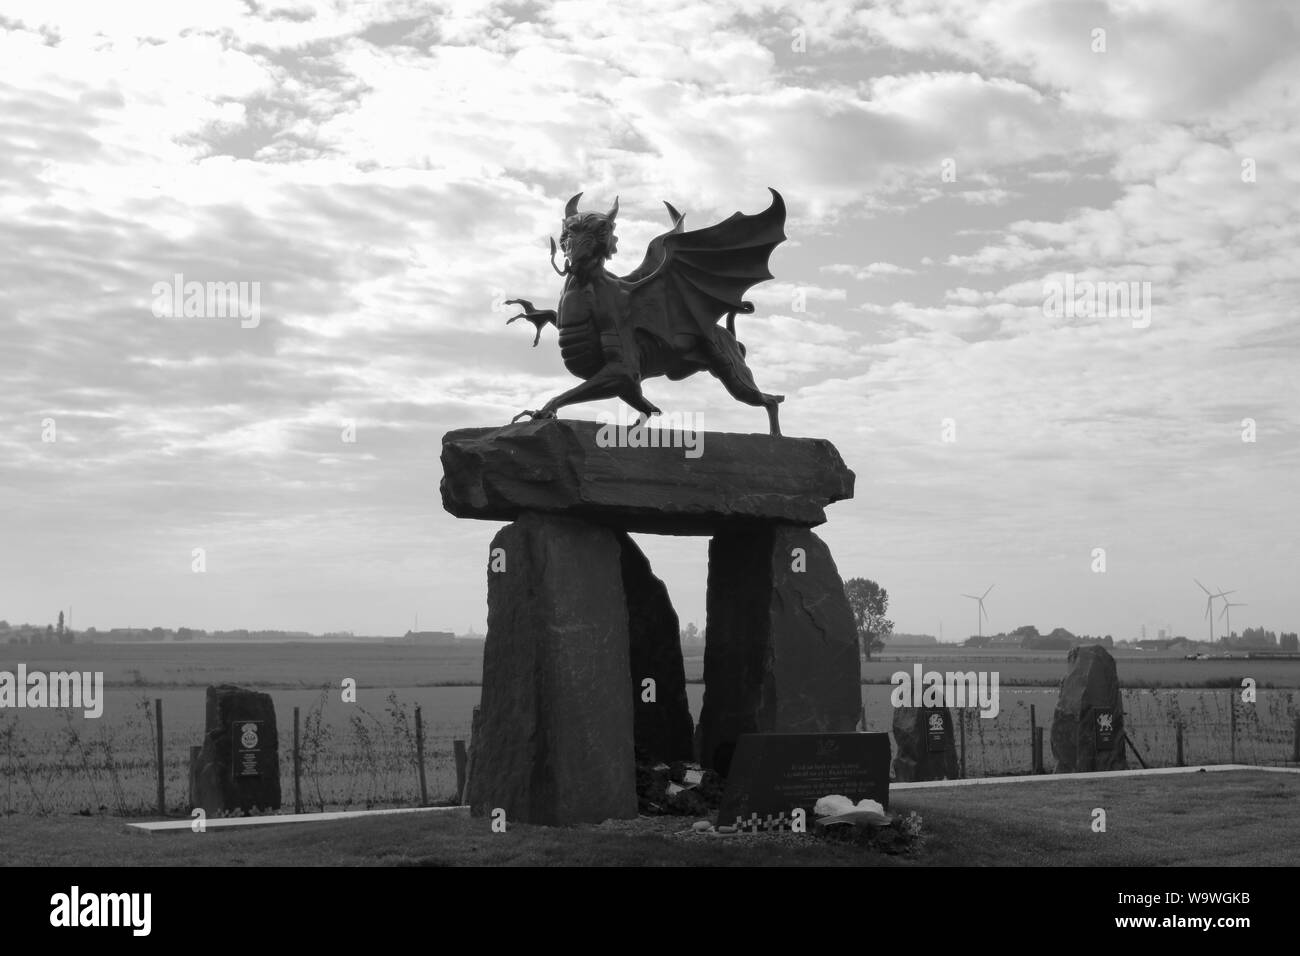 09/10/2017, Langemark-Poelkapelle, Belgium, Welsh Memorial Memorial WW1, In Black and white, The red dragon, built on a dolmen, stands in the middle o Stock Photo